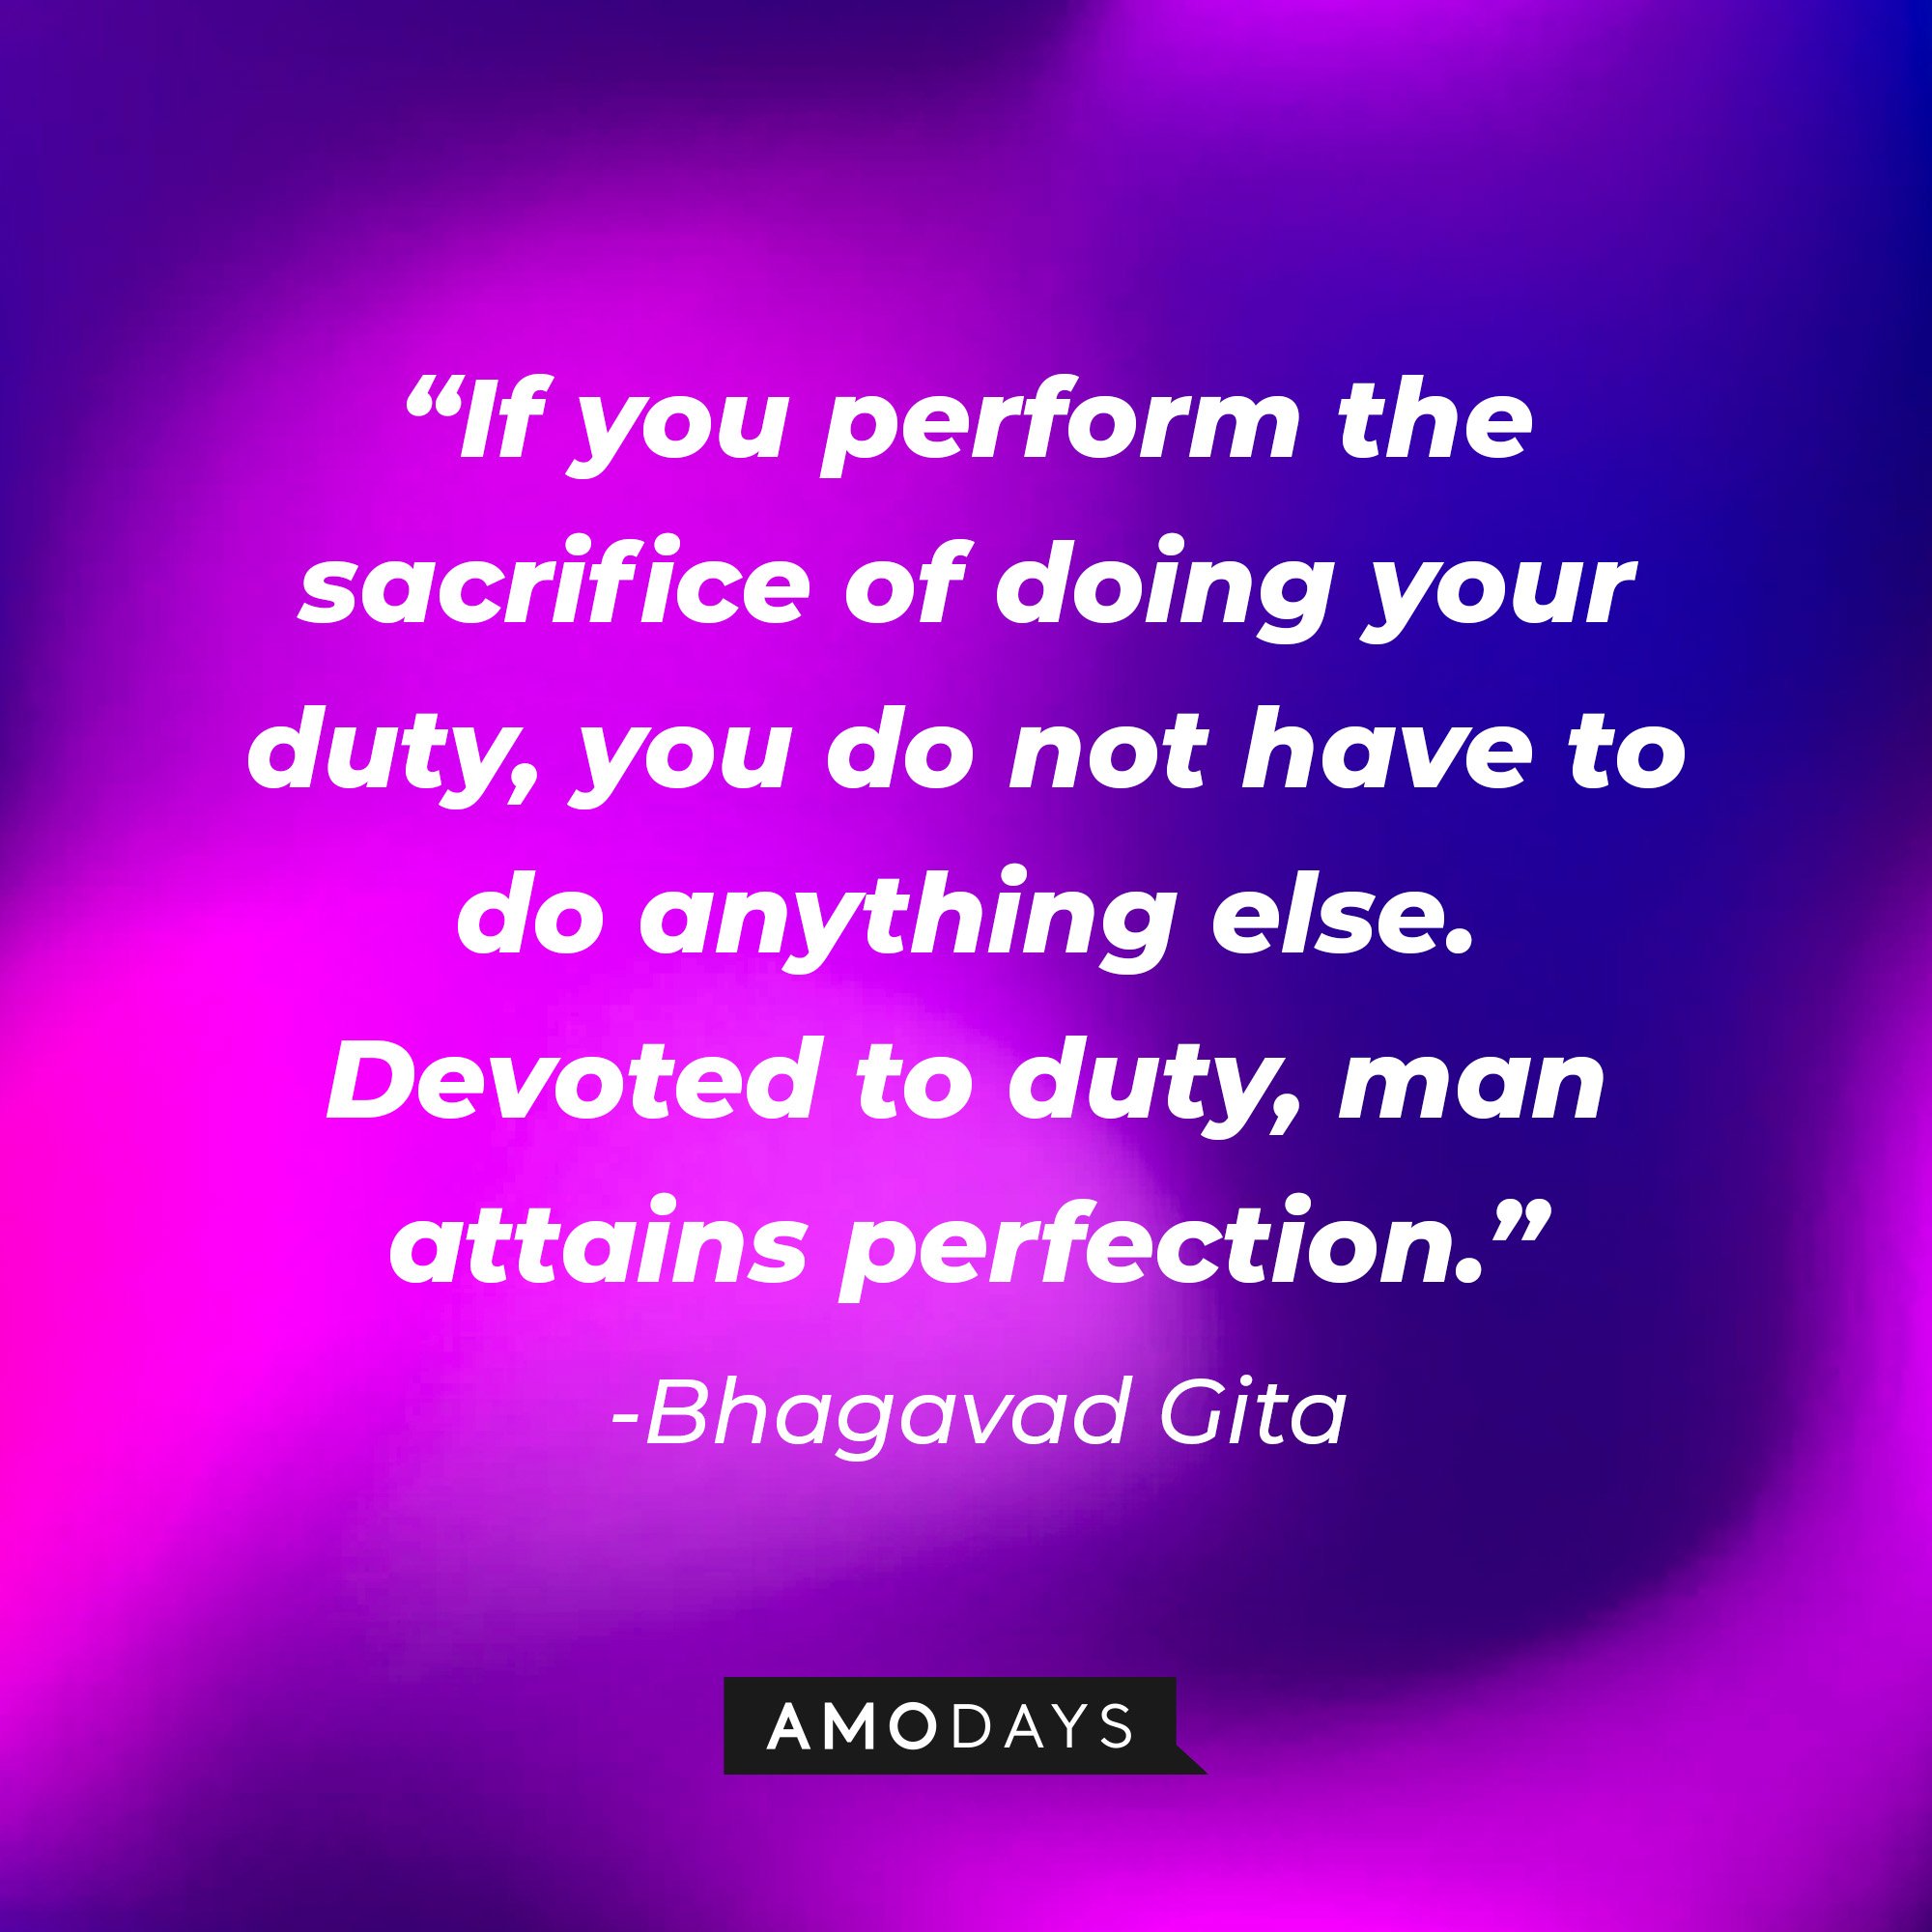 Bhagavad Gita's quote: “If you perform the sacrifice of doing your duty, you do not have to do anything else. Devoted to duty, man attains perfection.” | Image: AmoDays